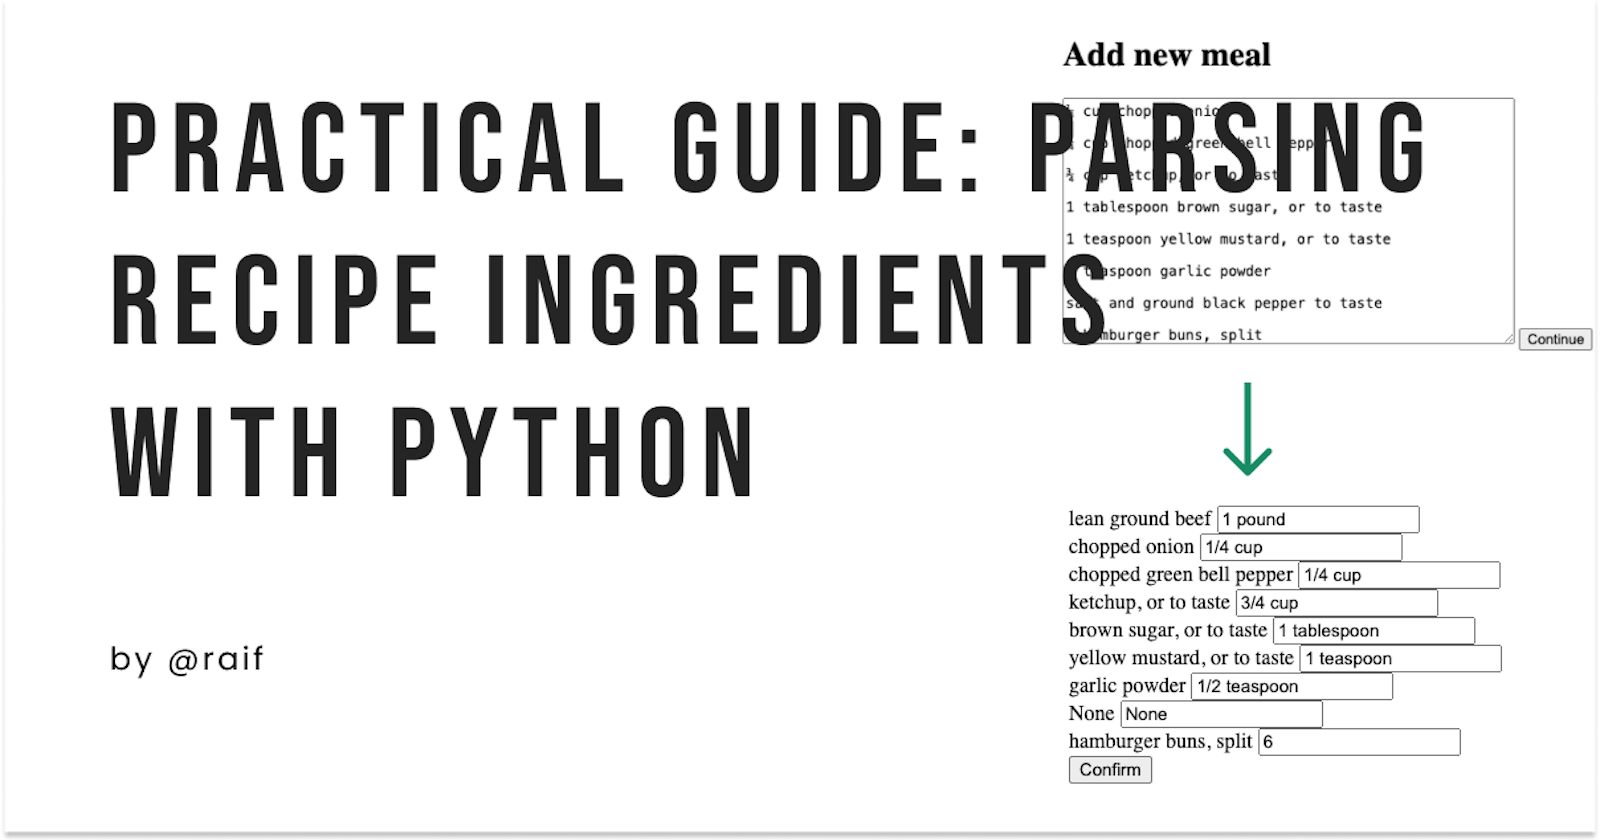 A Practical Guide to Parsing Recipe Ingredients with Python (Flask)